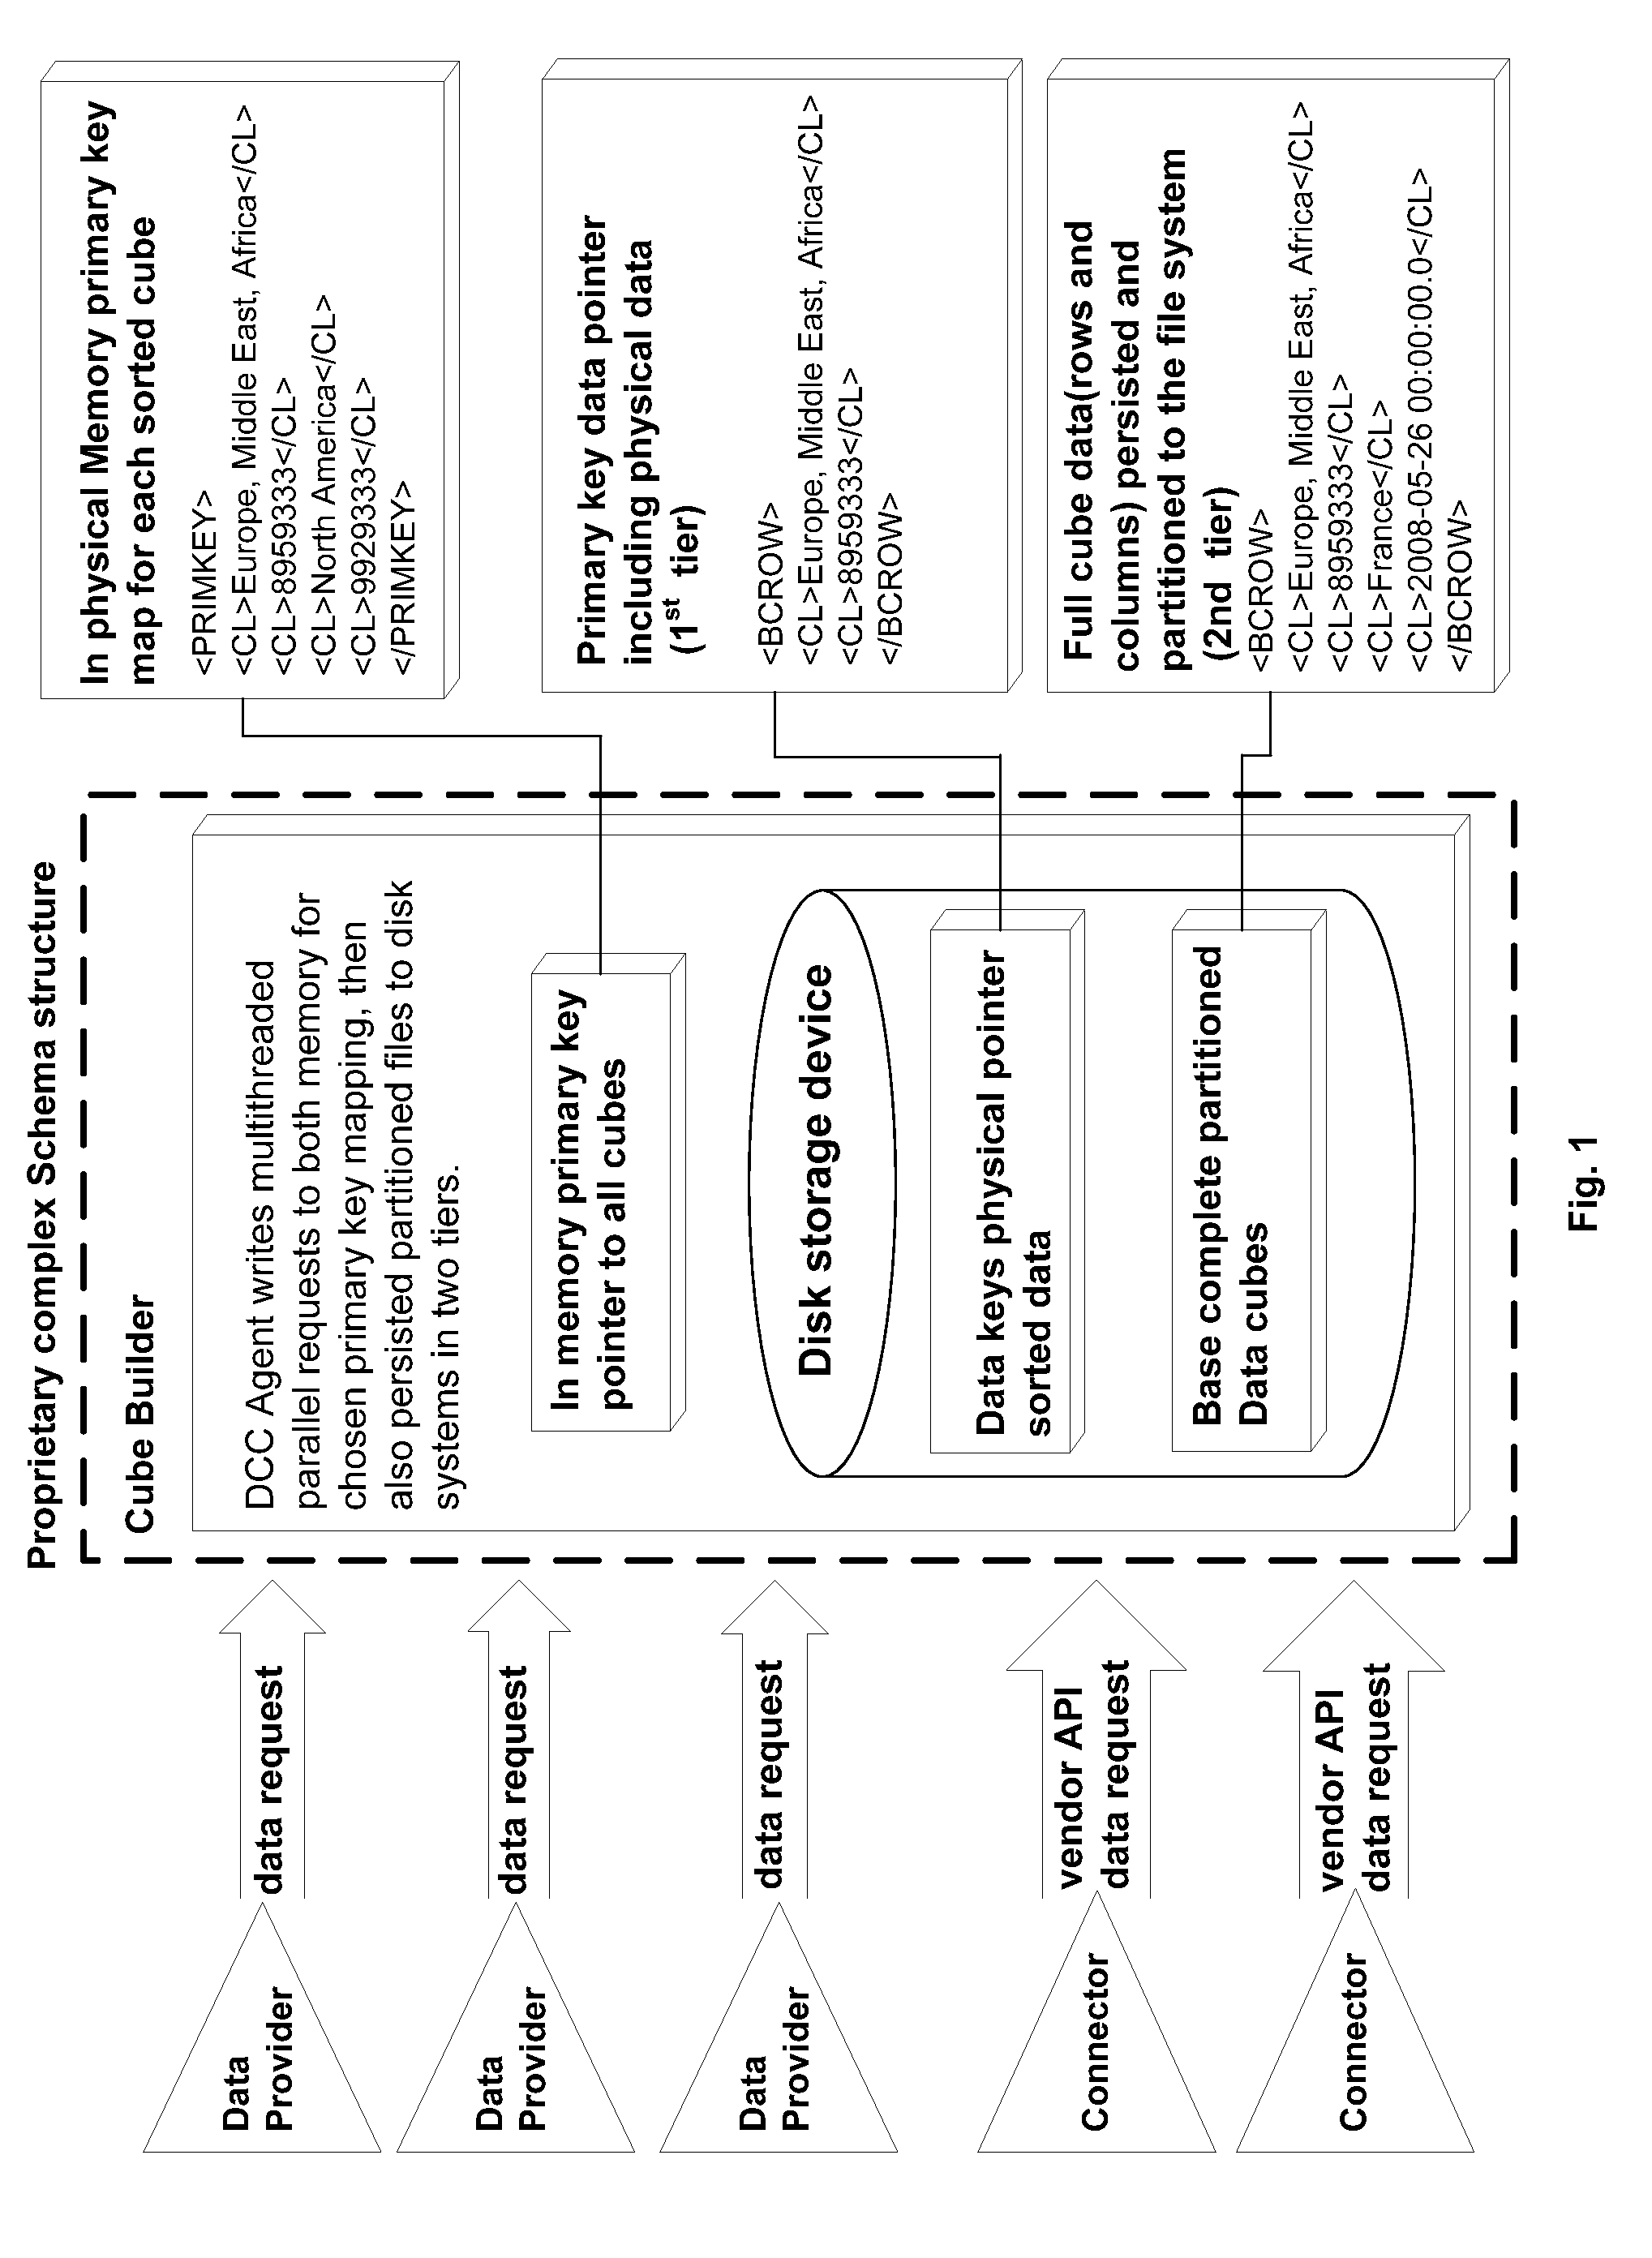 Method of Compiling Multiple Data Sources into One Dataset